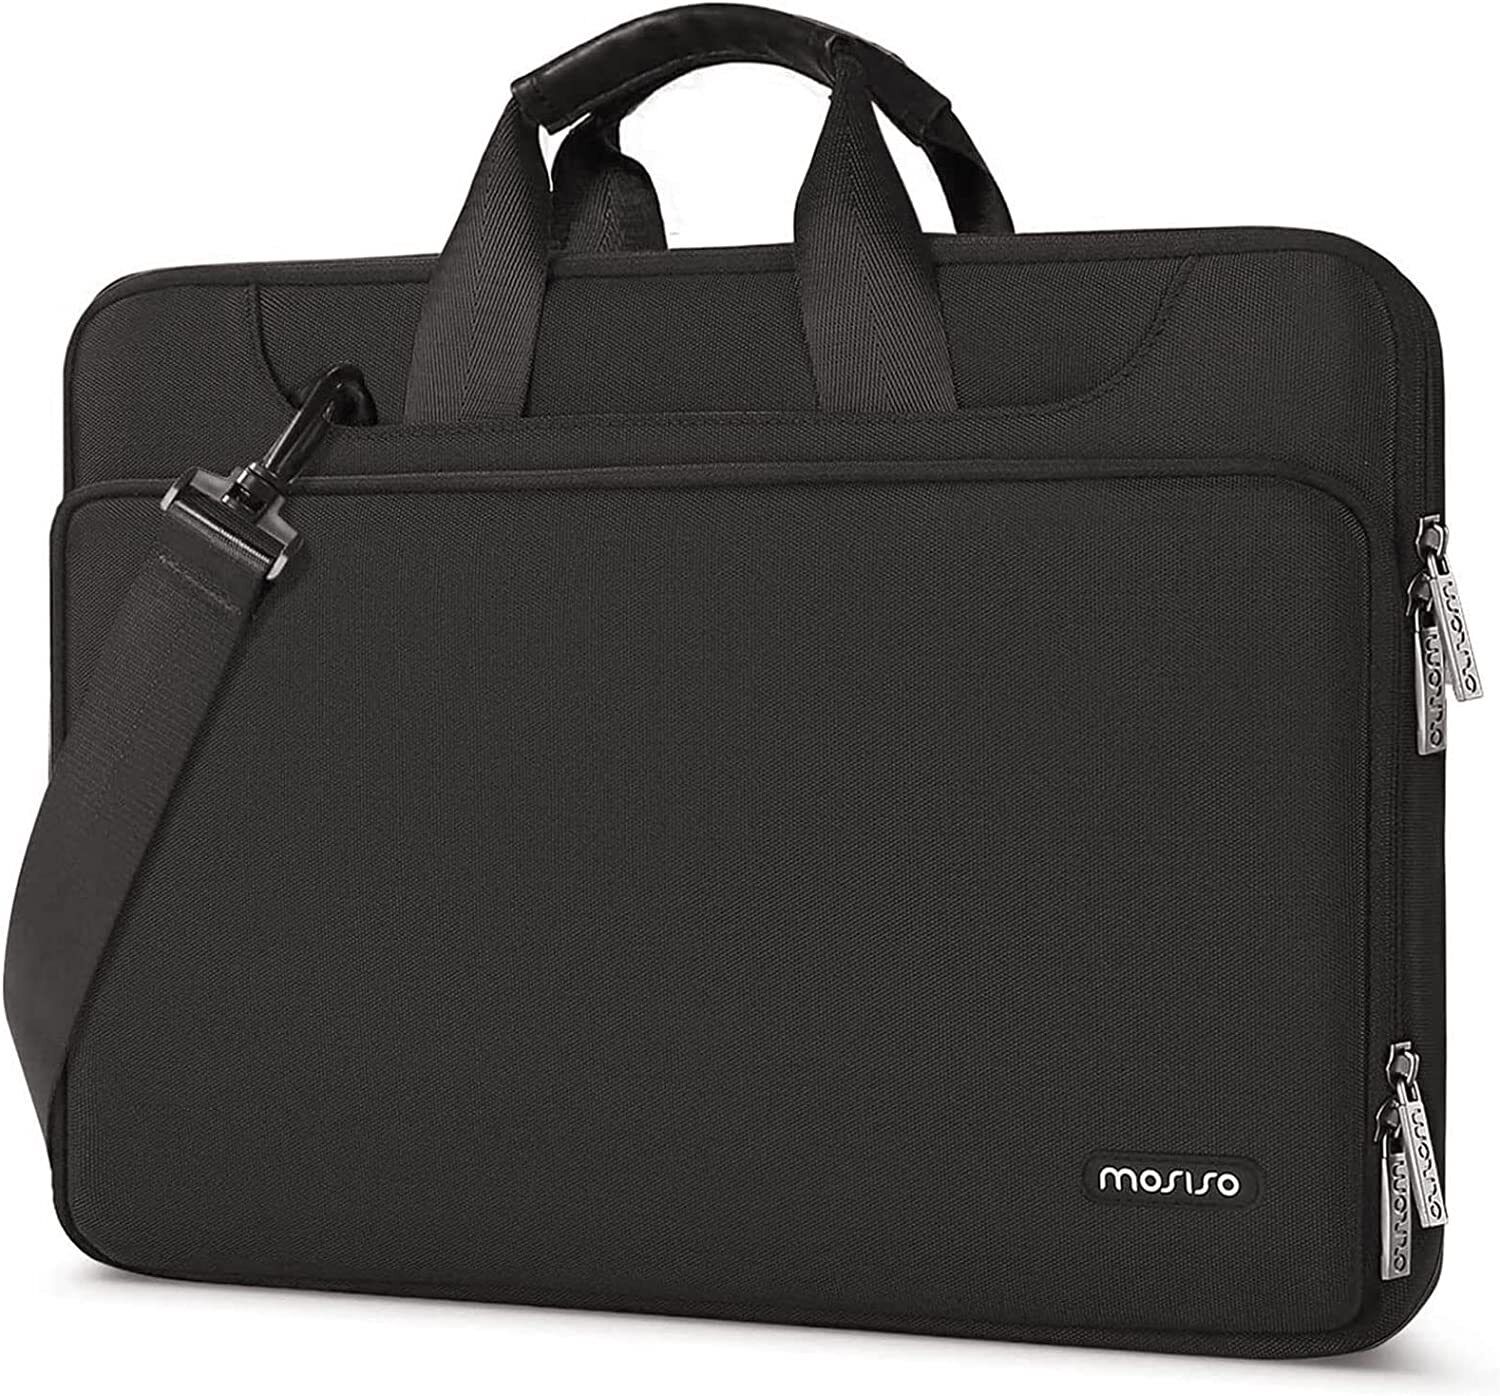 Laptop Bag Case For MacBook Pro Air M1 M2 13 14 15 16 17 inch HP Acer Asus Dell